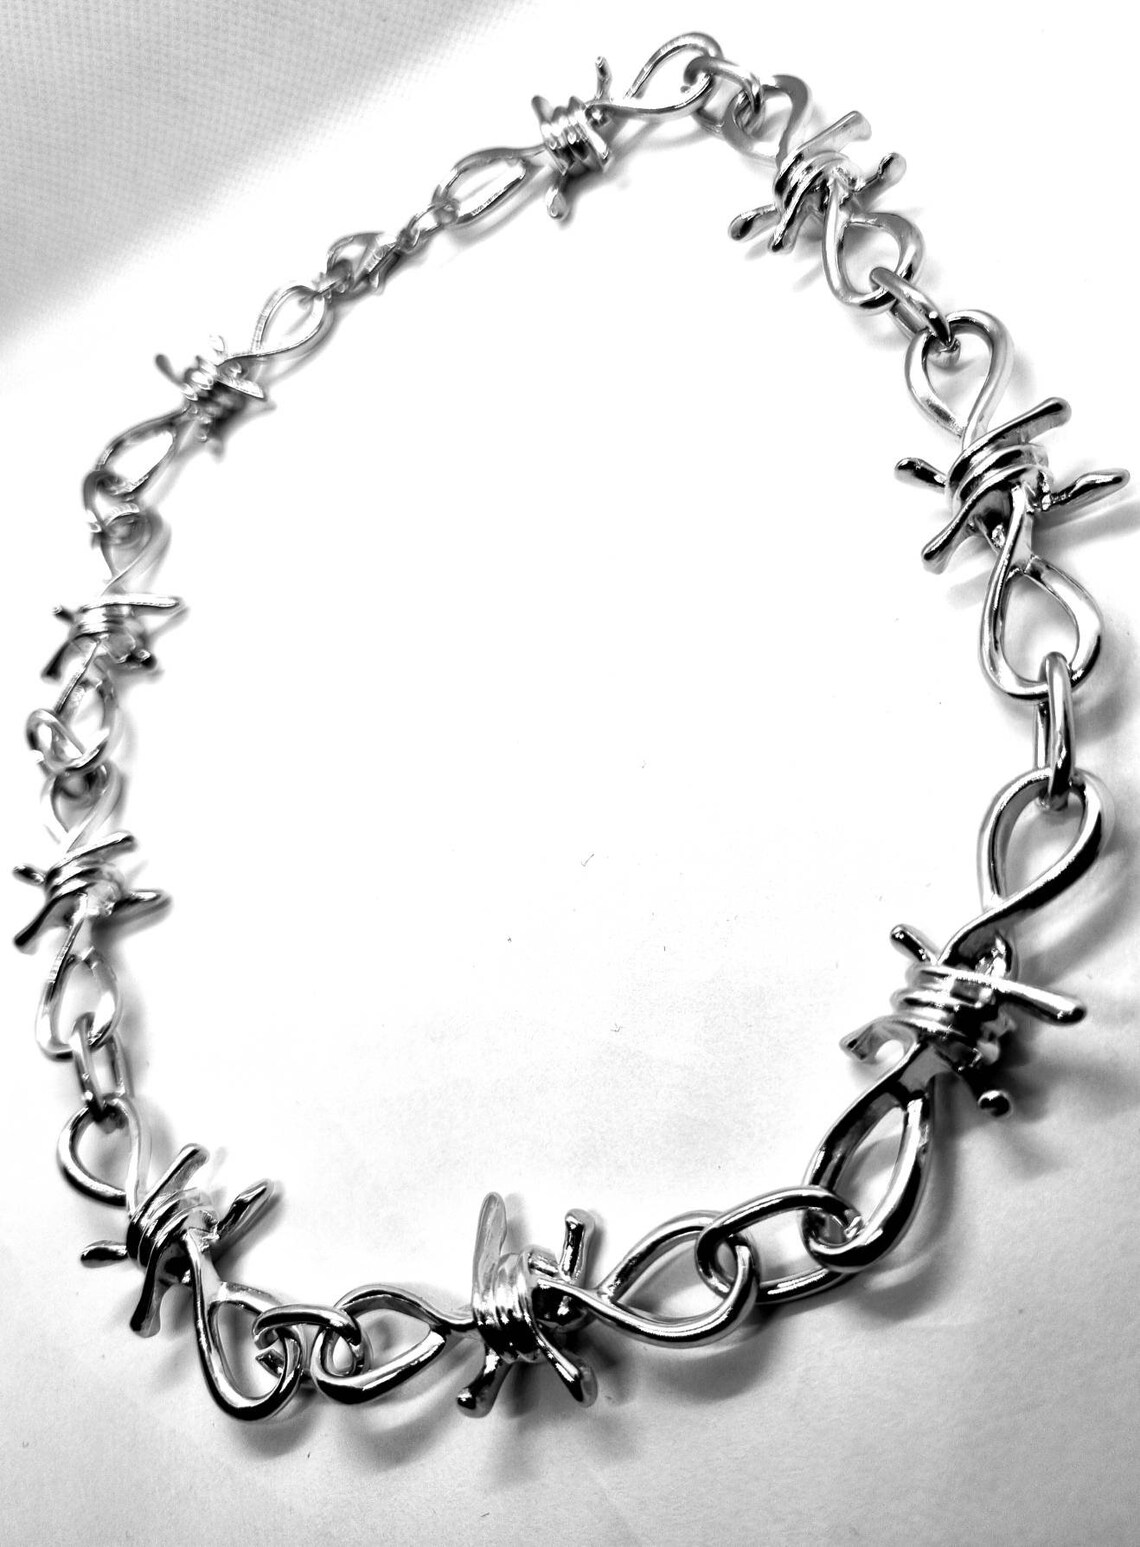 Barbed Wire Choker Stainless Steel Necklace Gothic Grunge | Etsy Stainless Steel Barbed Wire Necklace